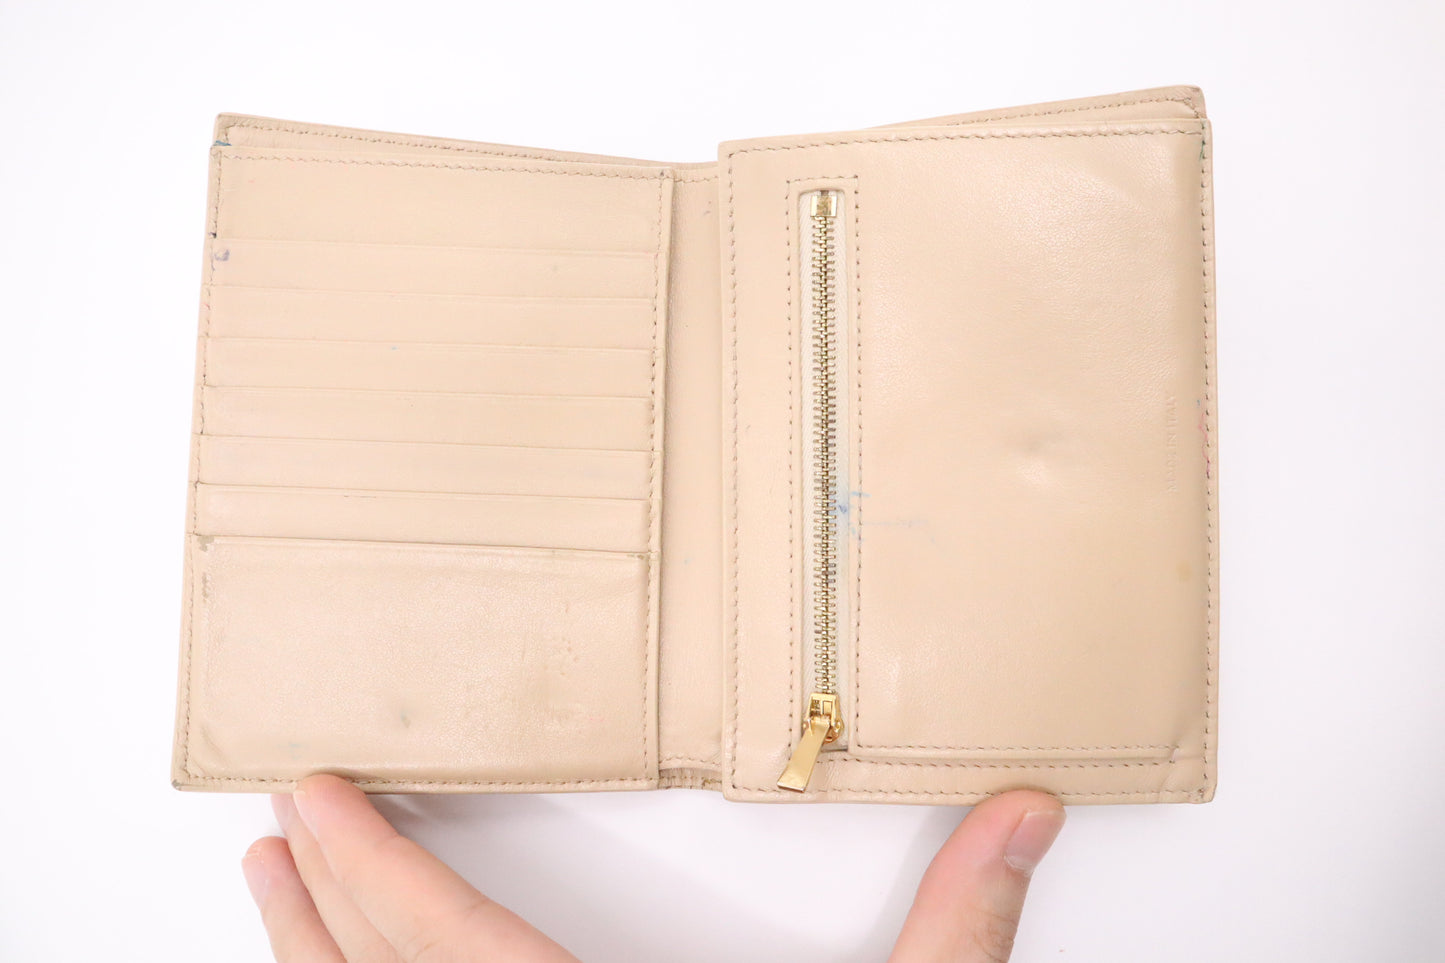 Celine Compact Wallet in Beige and Yellow Leather